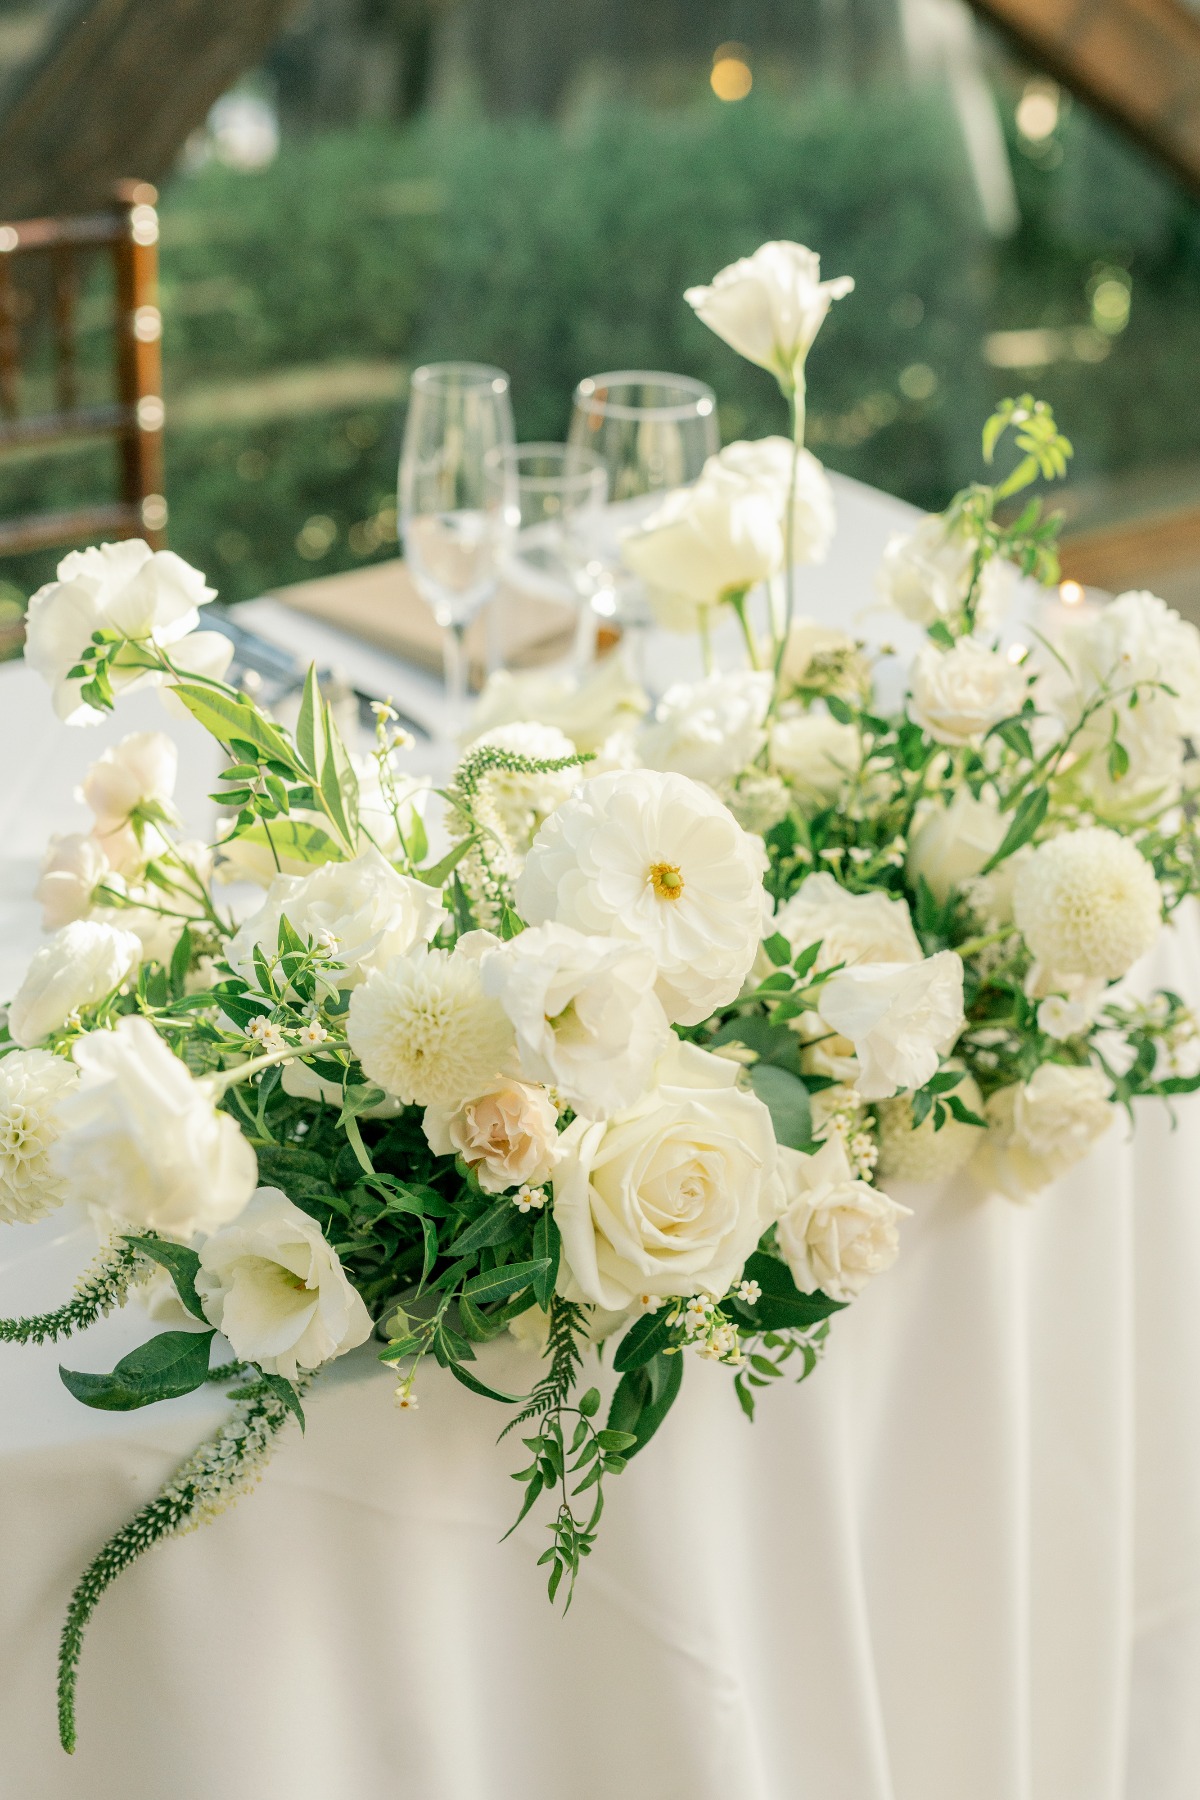 white and green floral arrangements